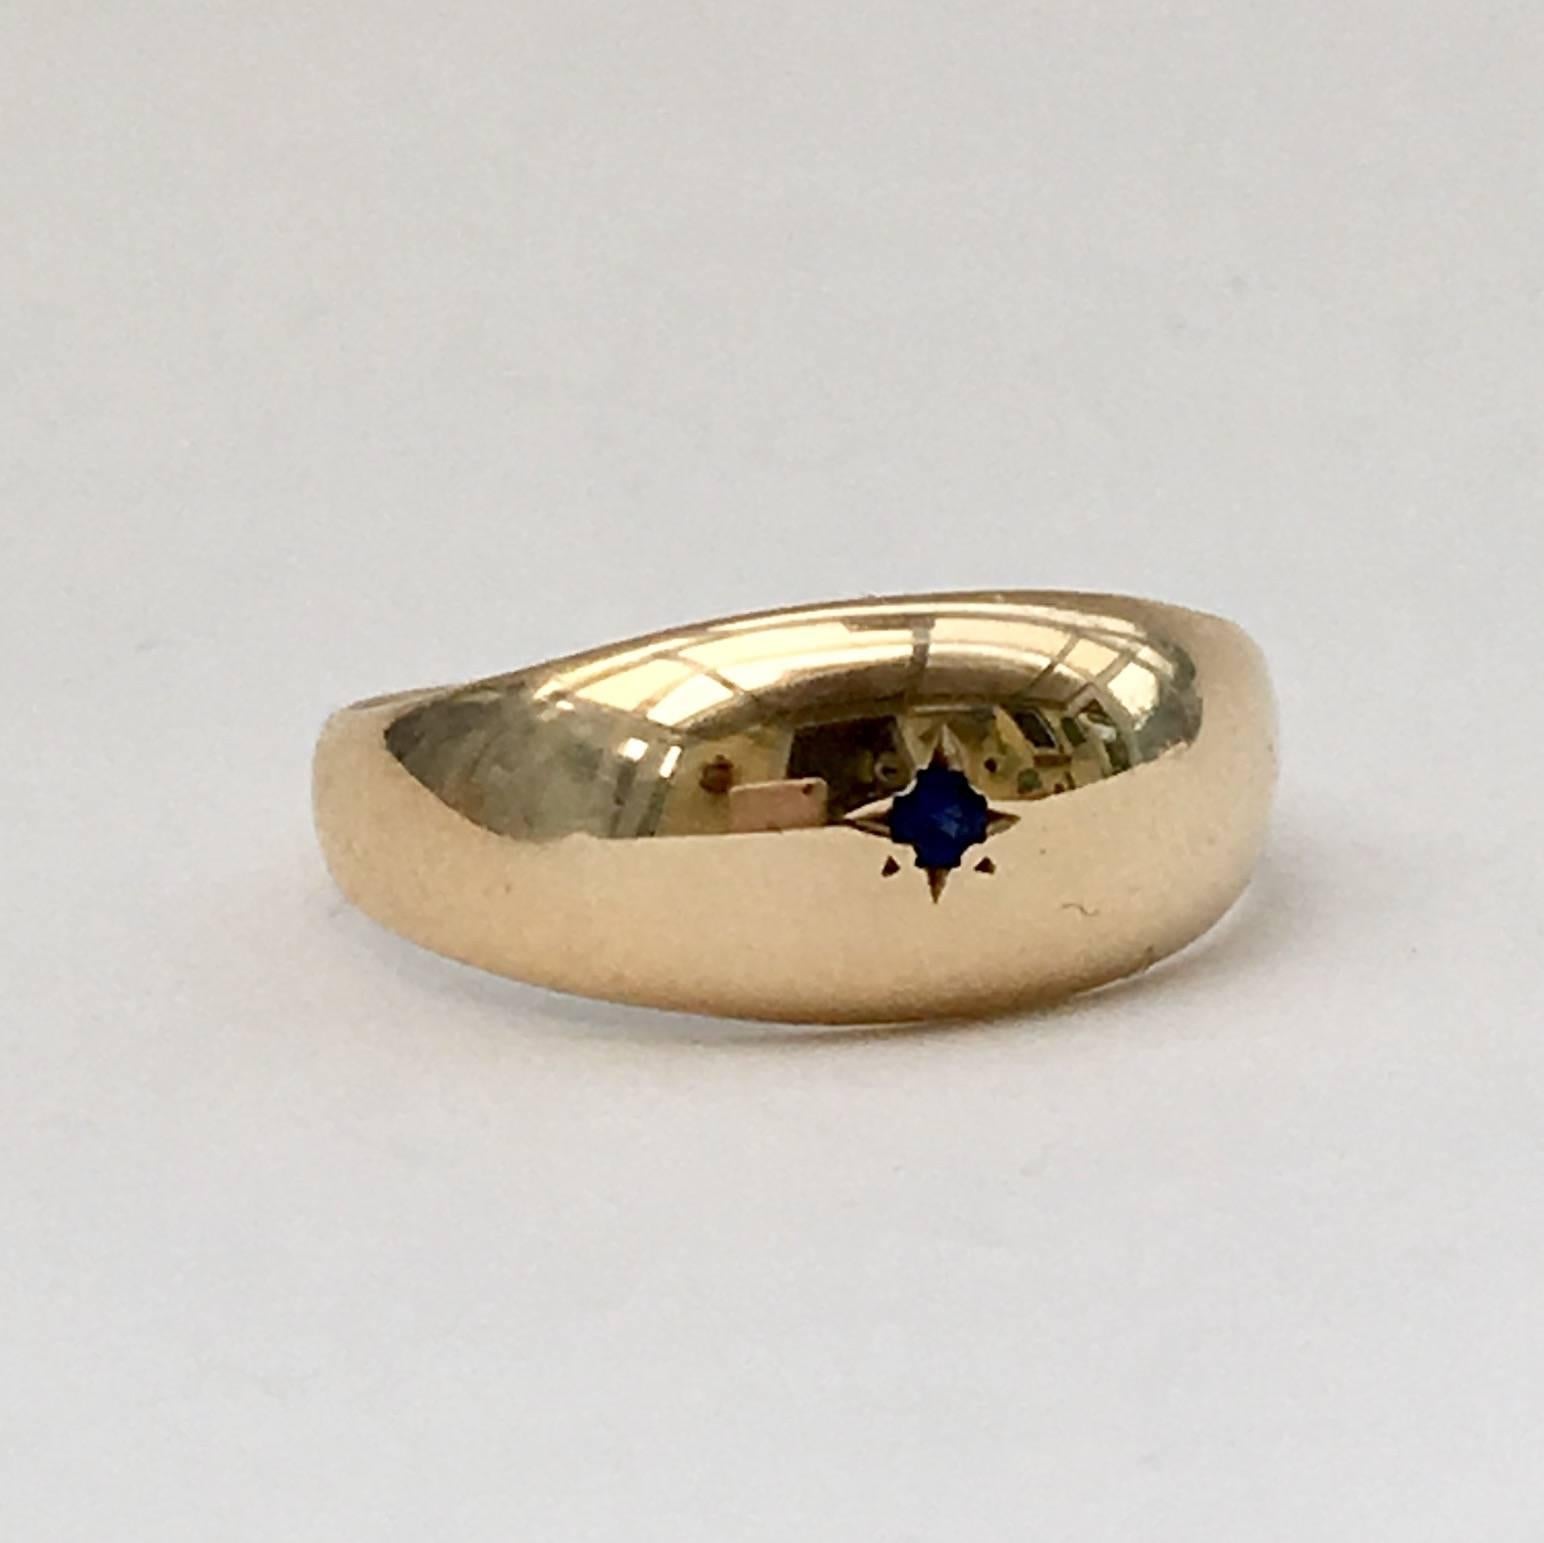 This stylish 9ct gold ring dates from 1969. It has a tiny midnight blue sapphire, set inside a four-point star. The design is beautifully understated and oozes with contemporary appeal.  

Size: UK N 1/2, US 7